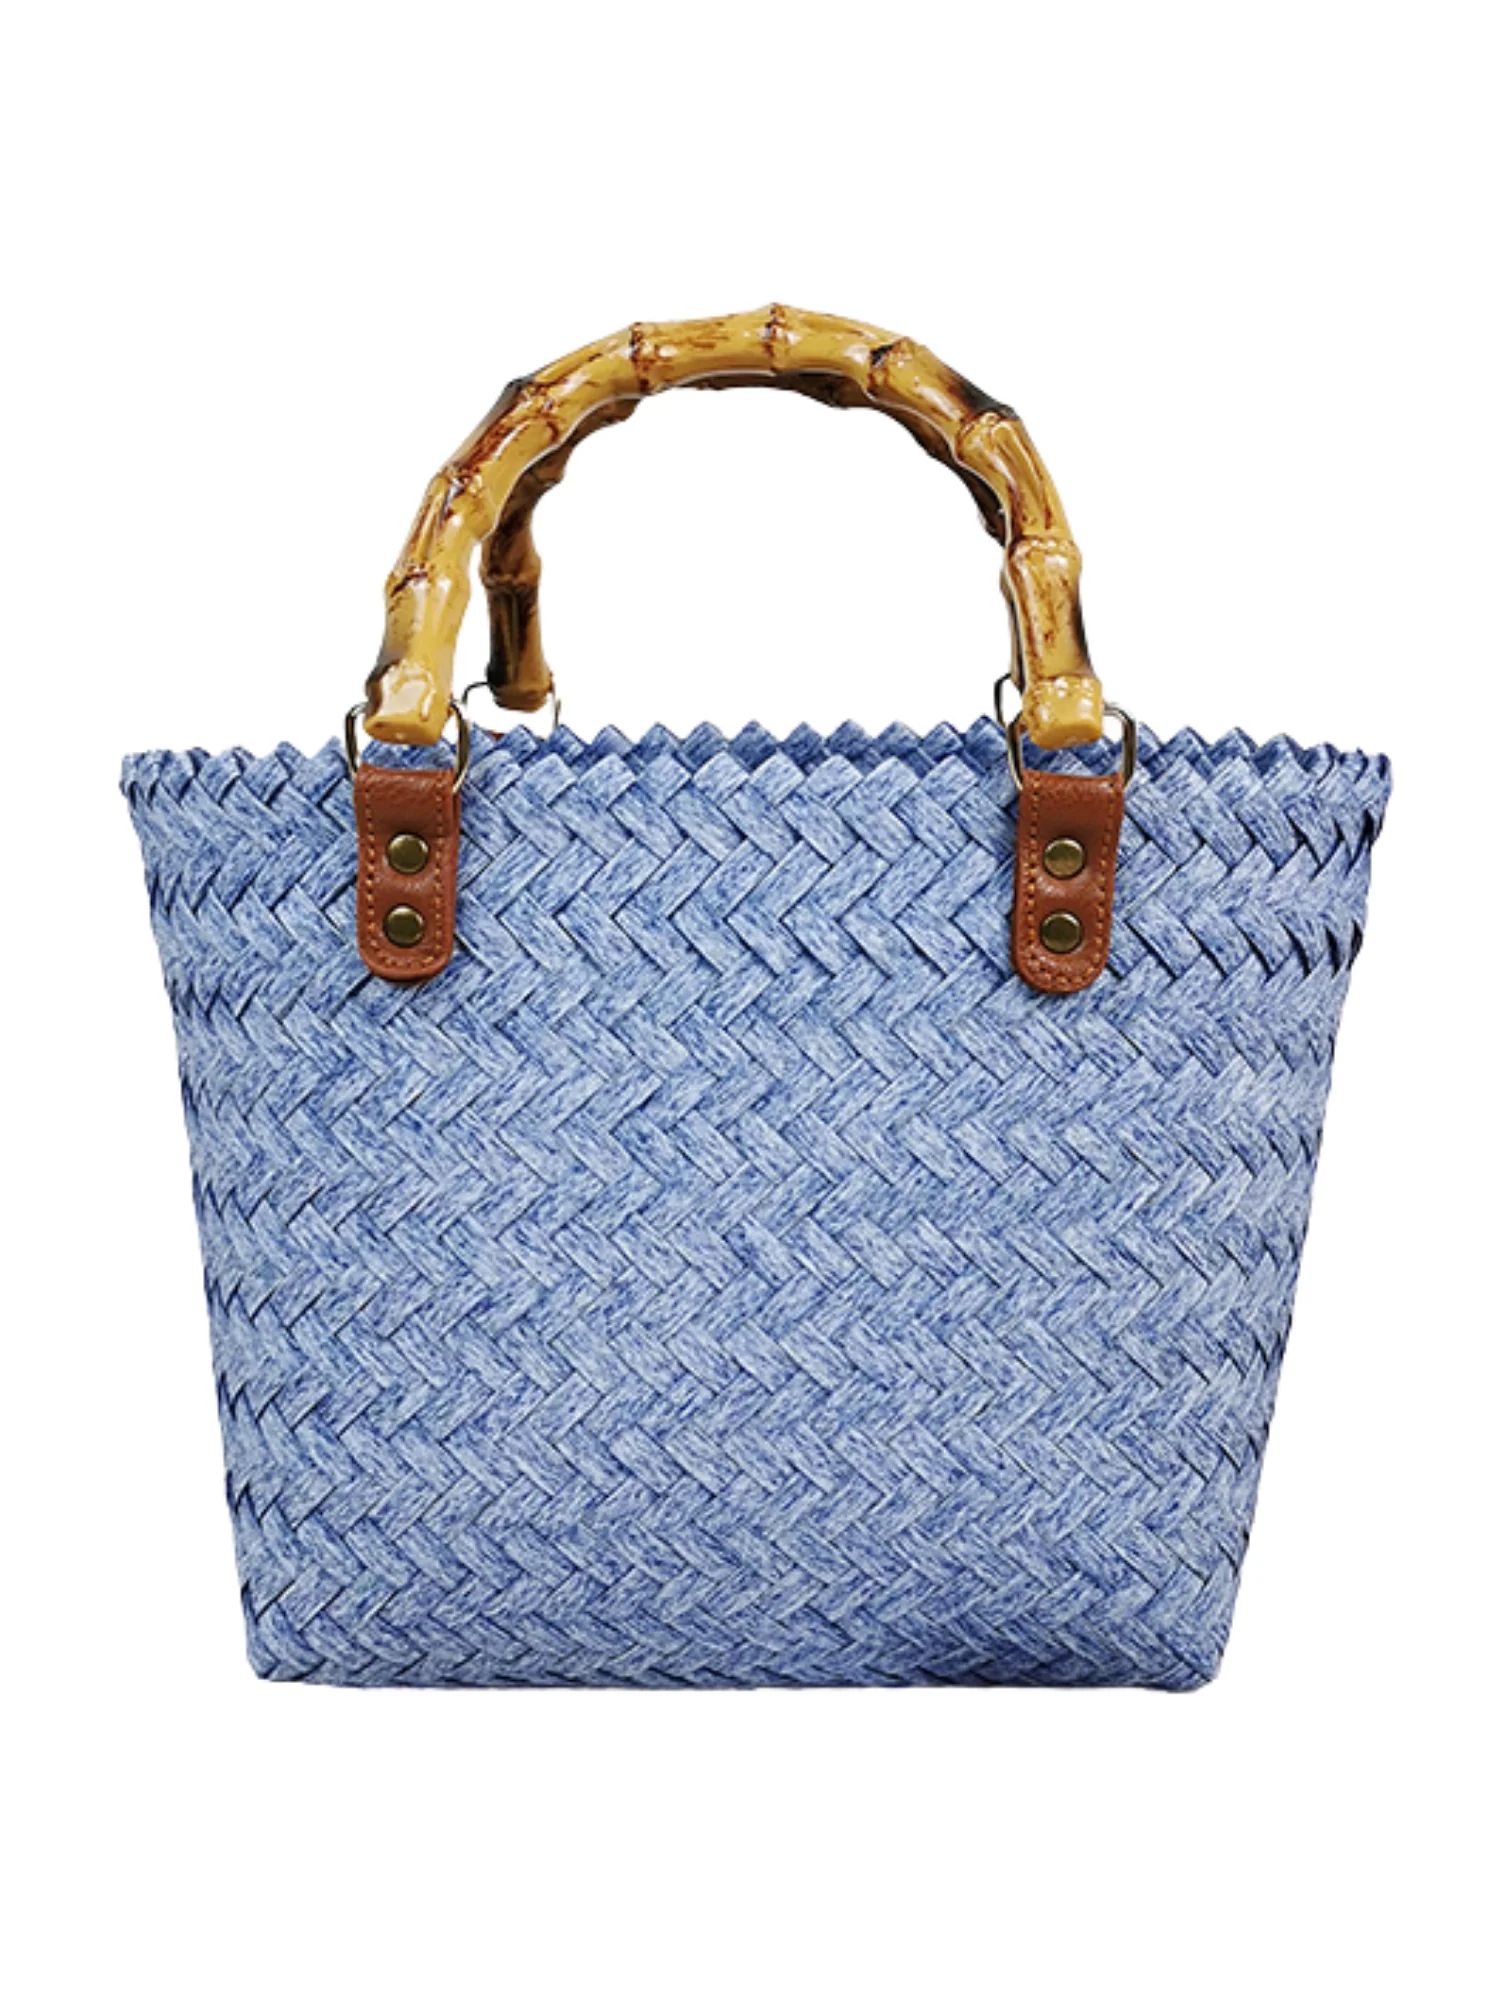 'Lucy' Straw Purse With Bamboo Handle | Goodnight Macaroon